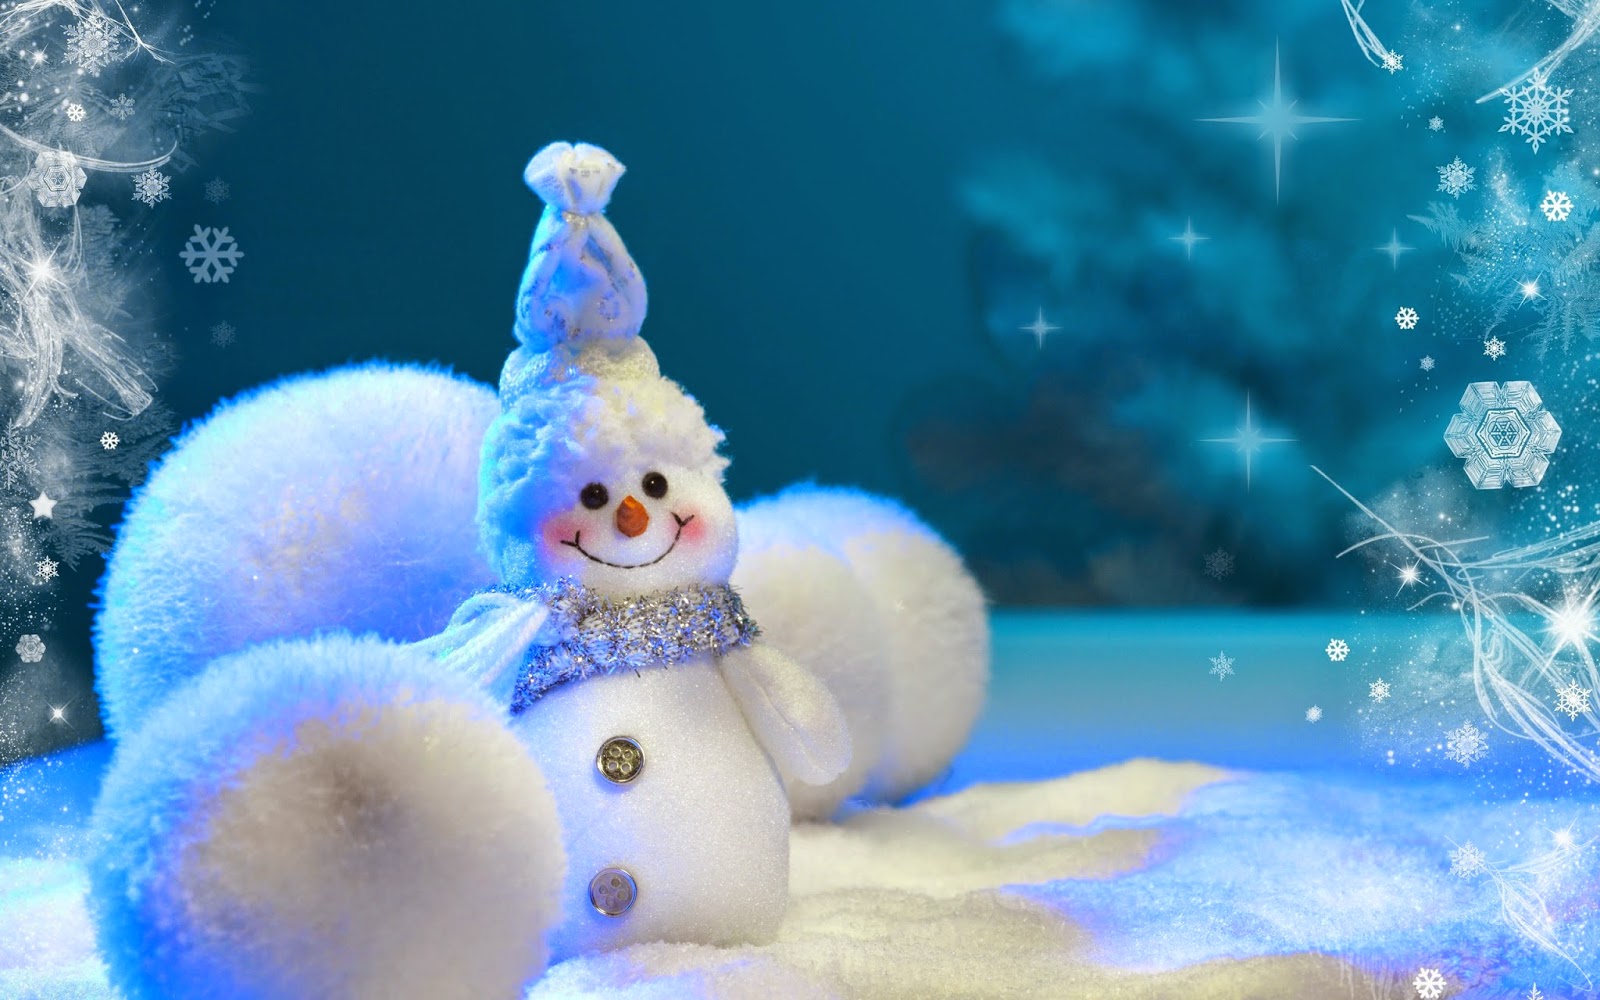 Cute Christmas Snowman images real dress decorations ideas